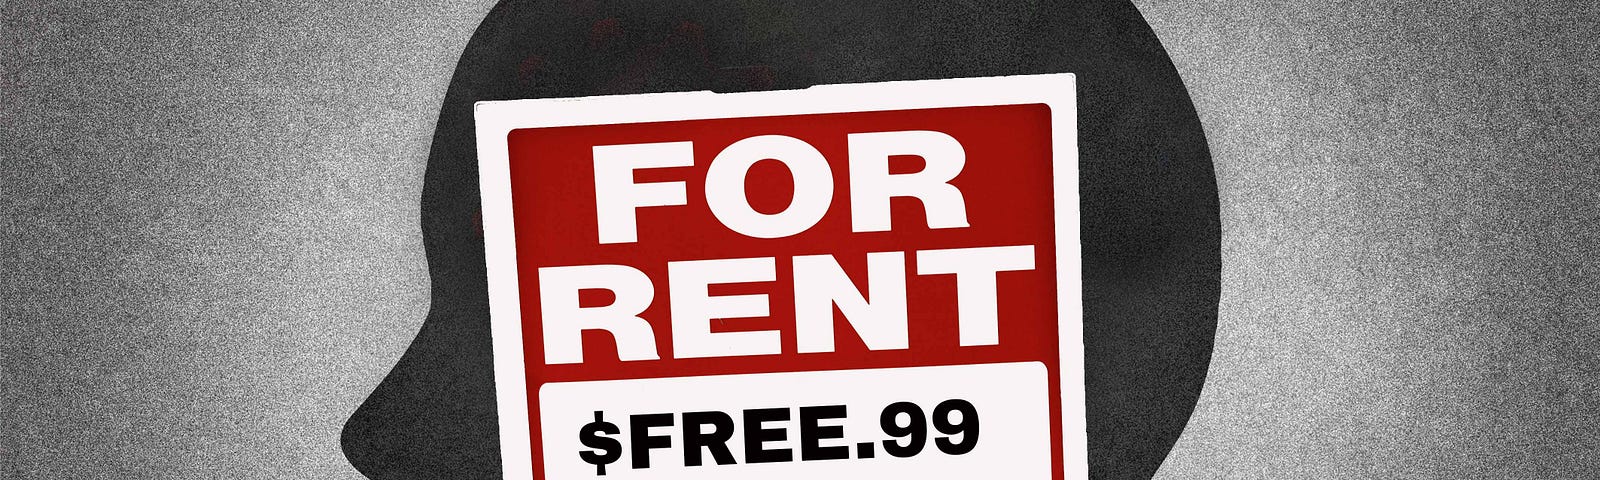 A black silhouette of a head on a gray background. There is a white and red, “for rent,” sign inside the head. The text, “$FREE.99,” is posted. on the sign.